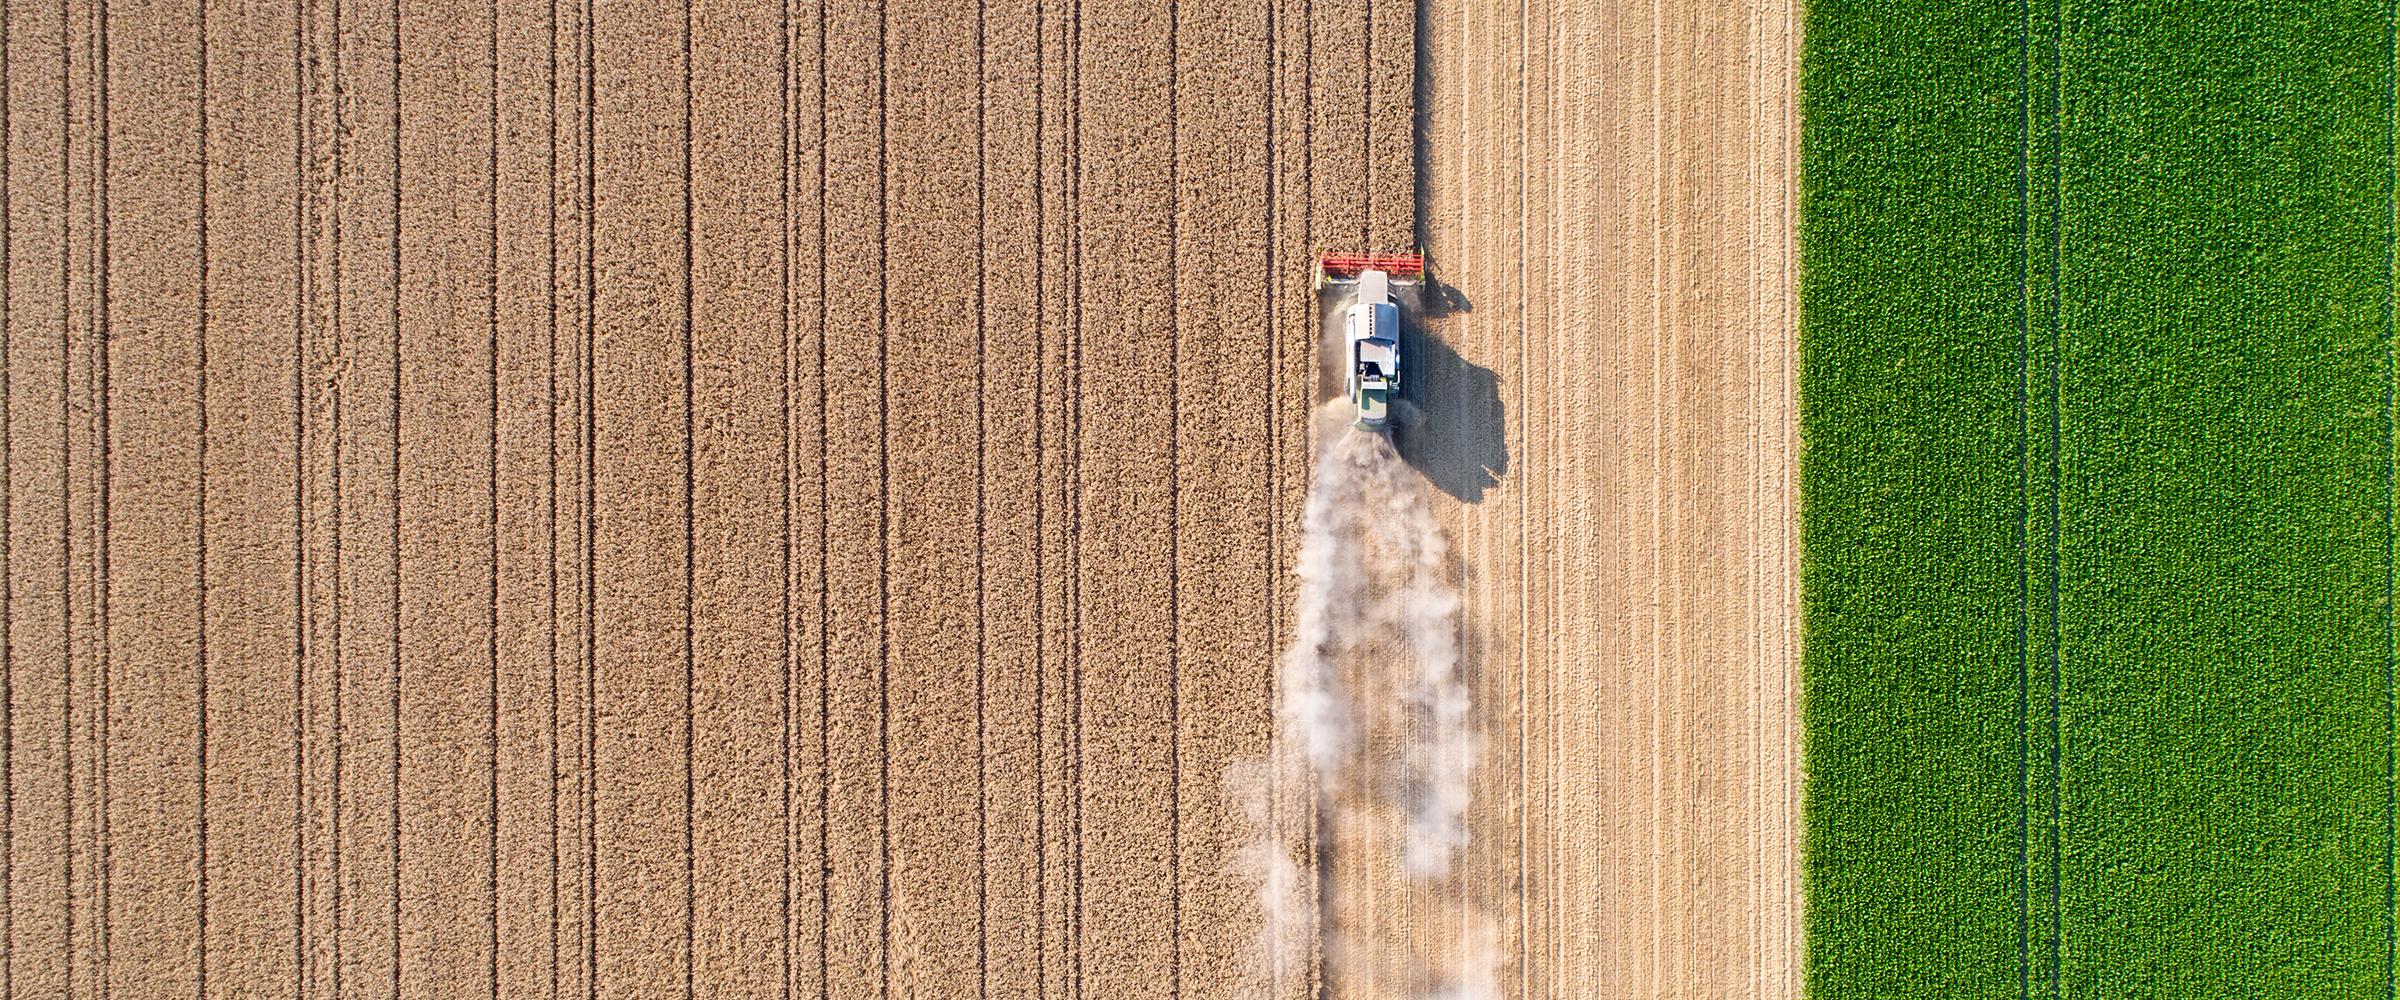 A combine harvester working through a field